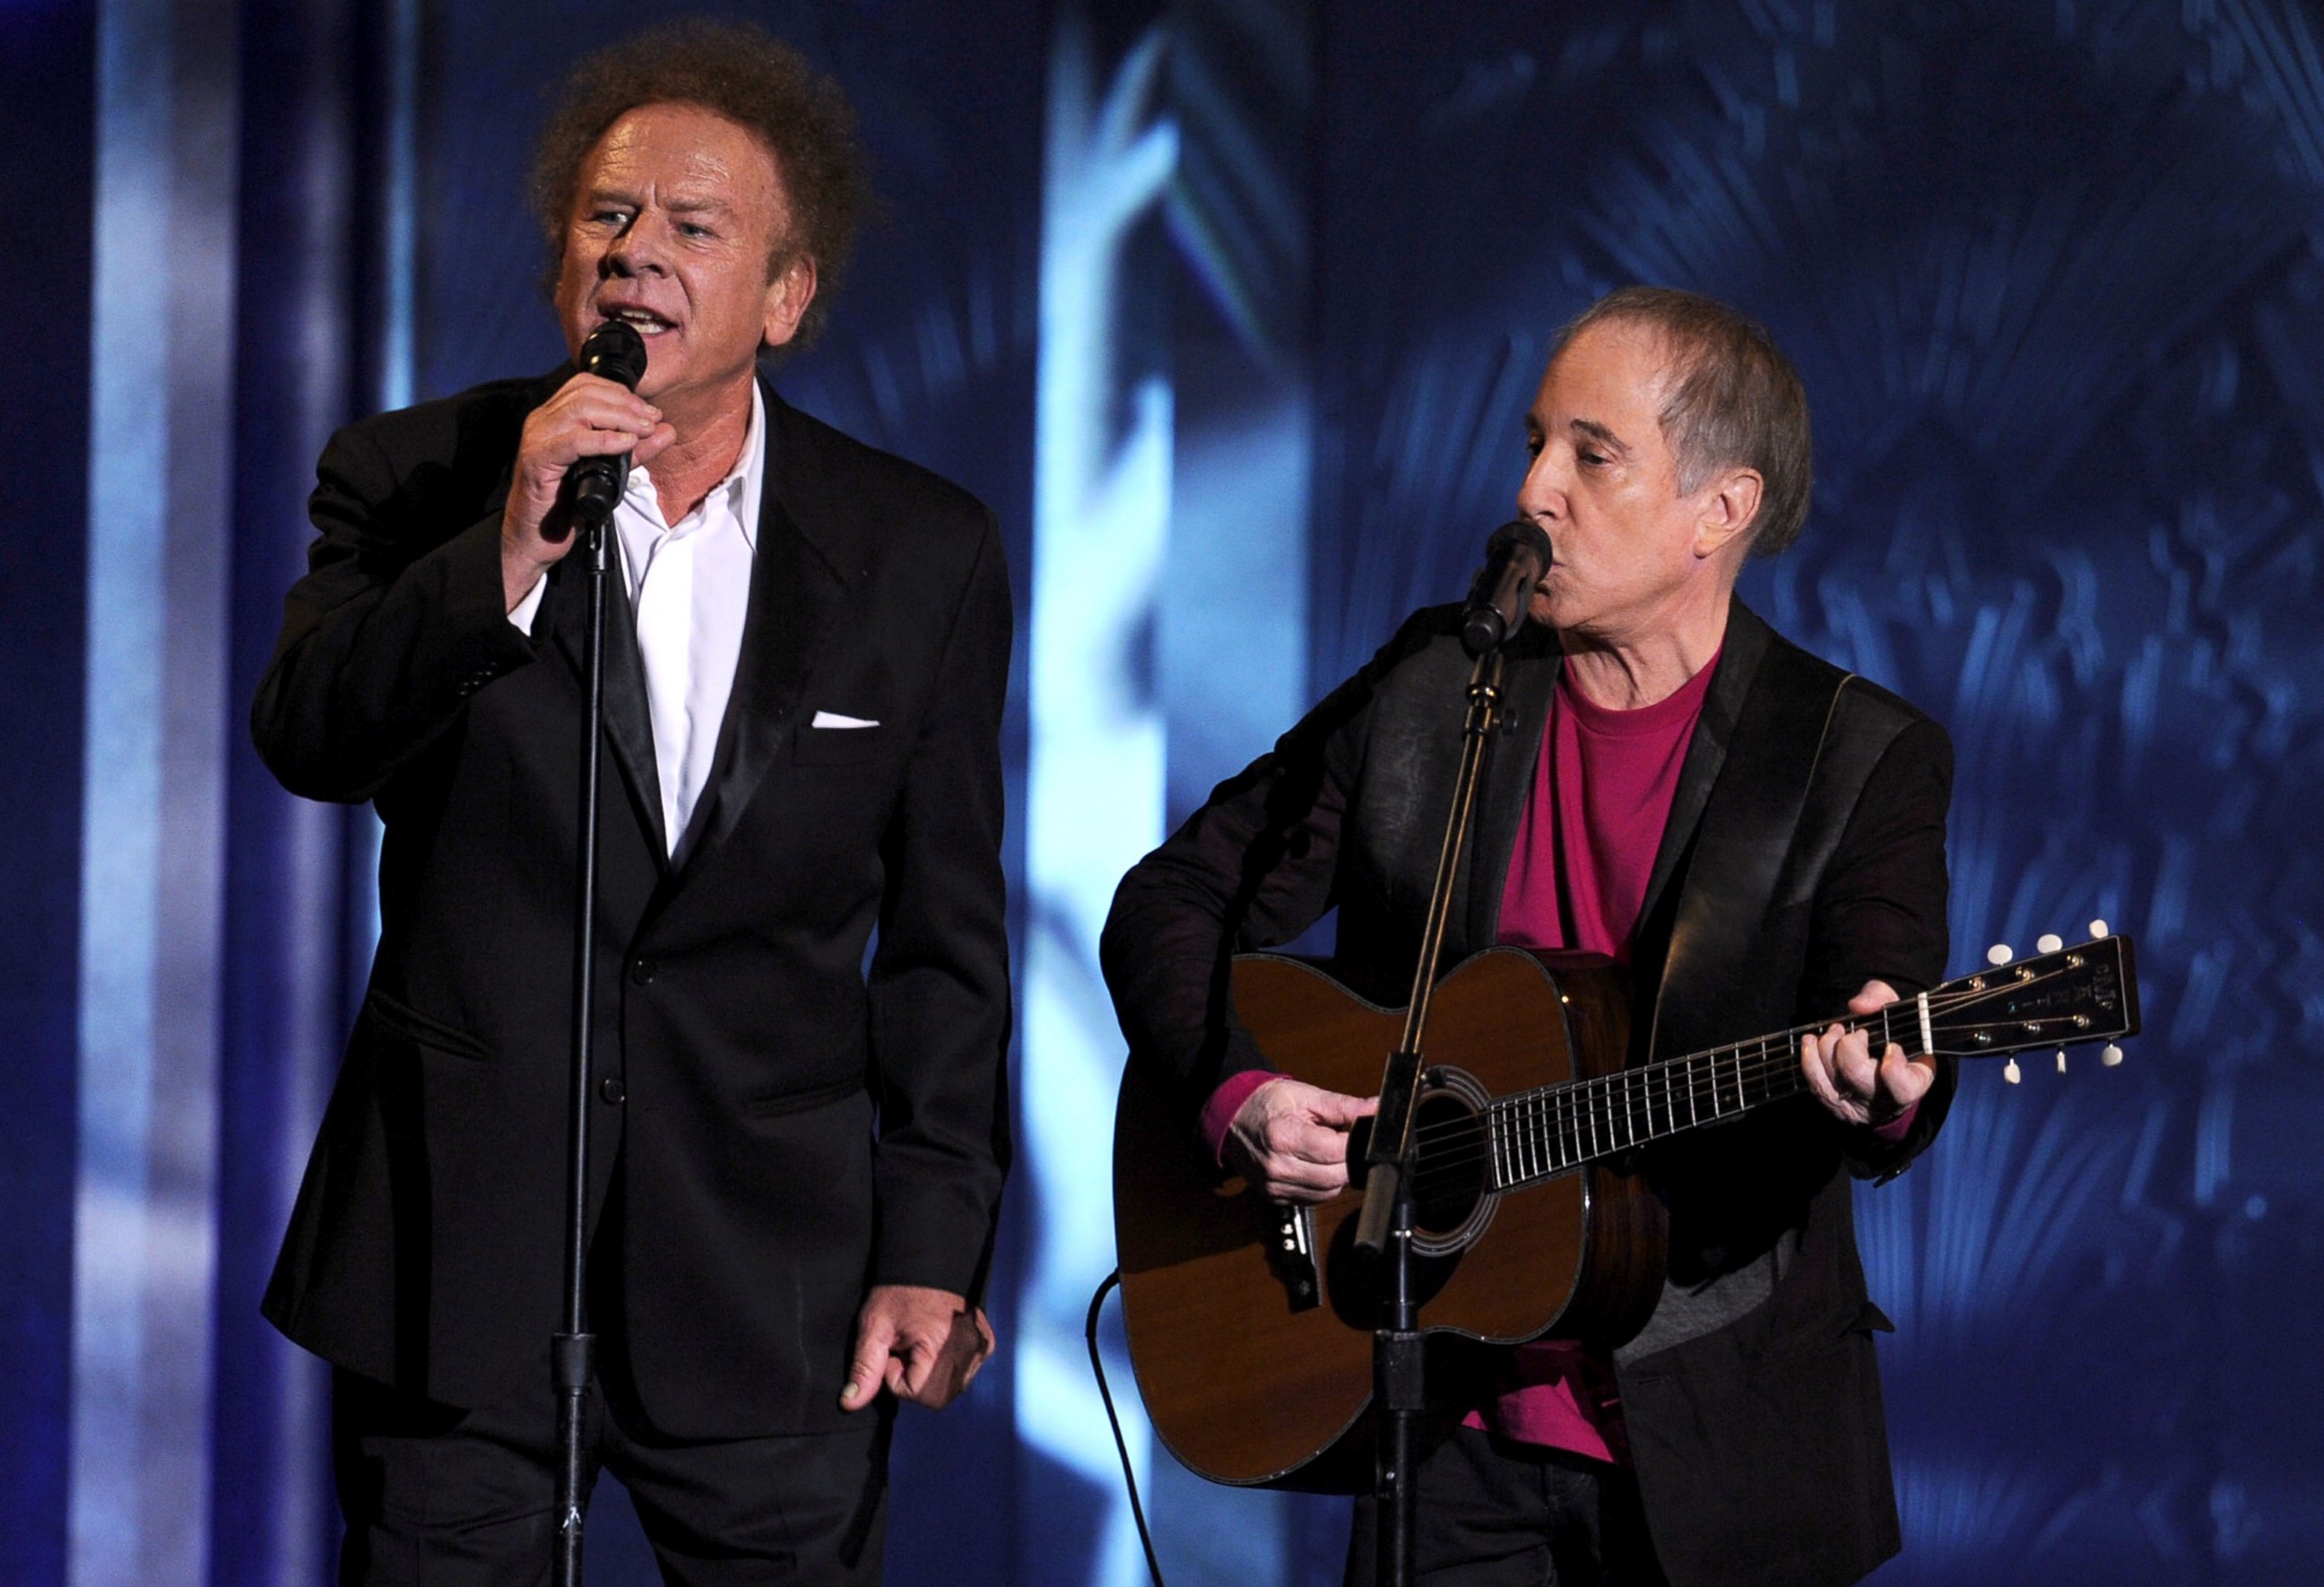 PHOTO: Musicians Art Garfunkel and Paul Simon of Simon & Garfunkel perform onstage during the 38th AFI Life Achievement Award honoring Mike Nichols held at Sony Pictures Studios, June 10, 2010, in Culver City, Calif